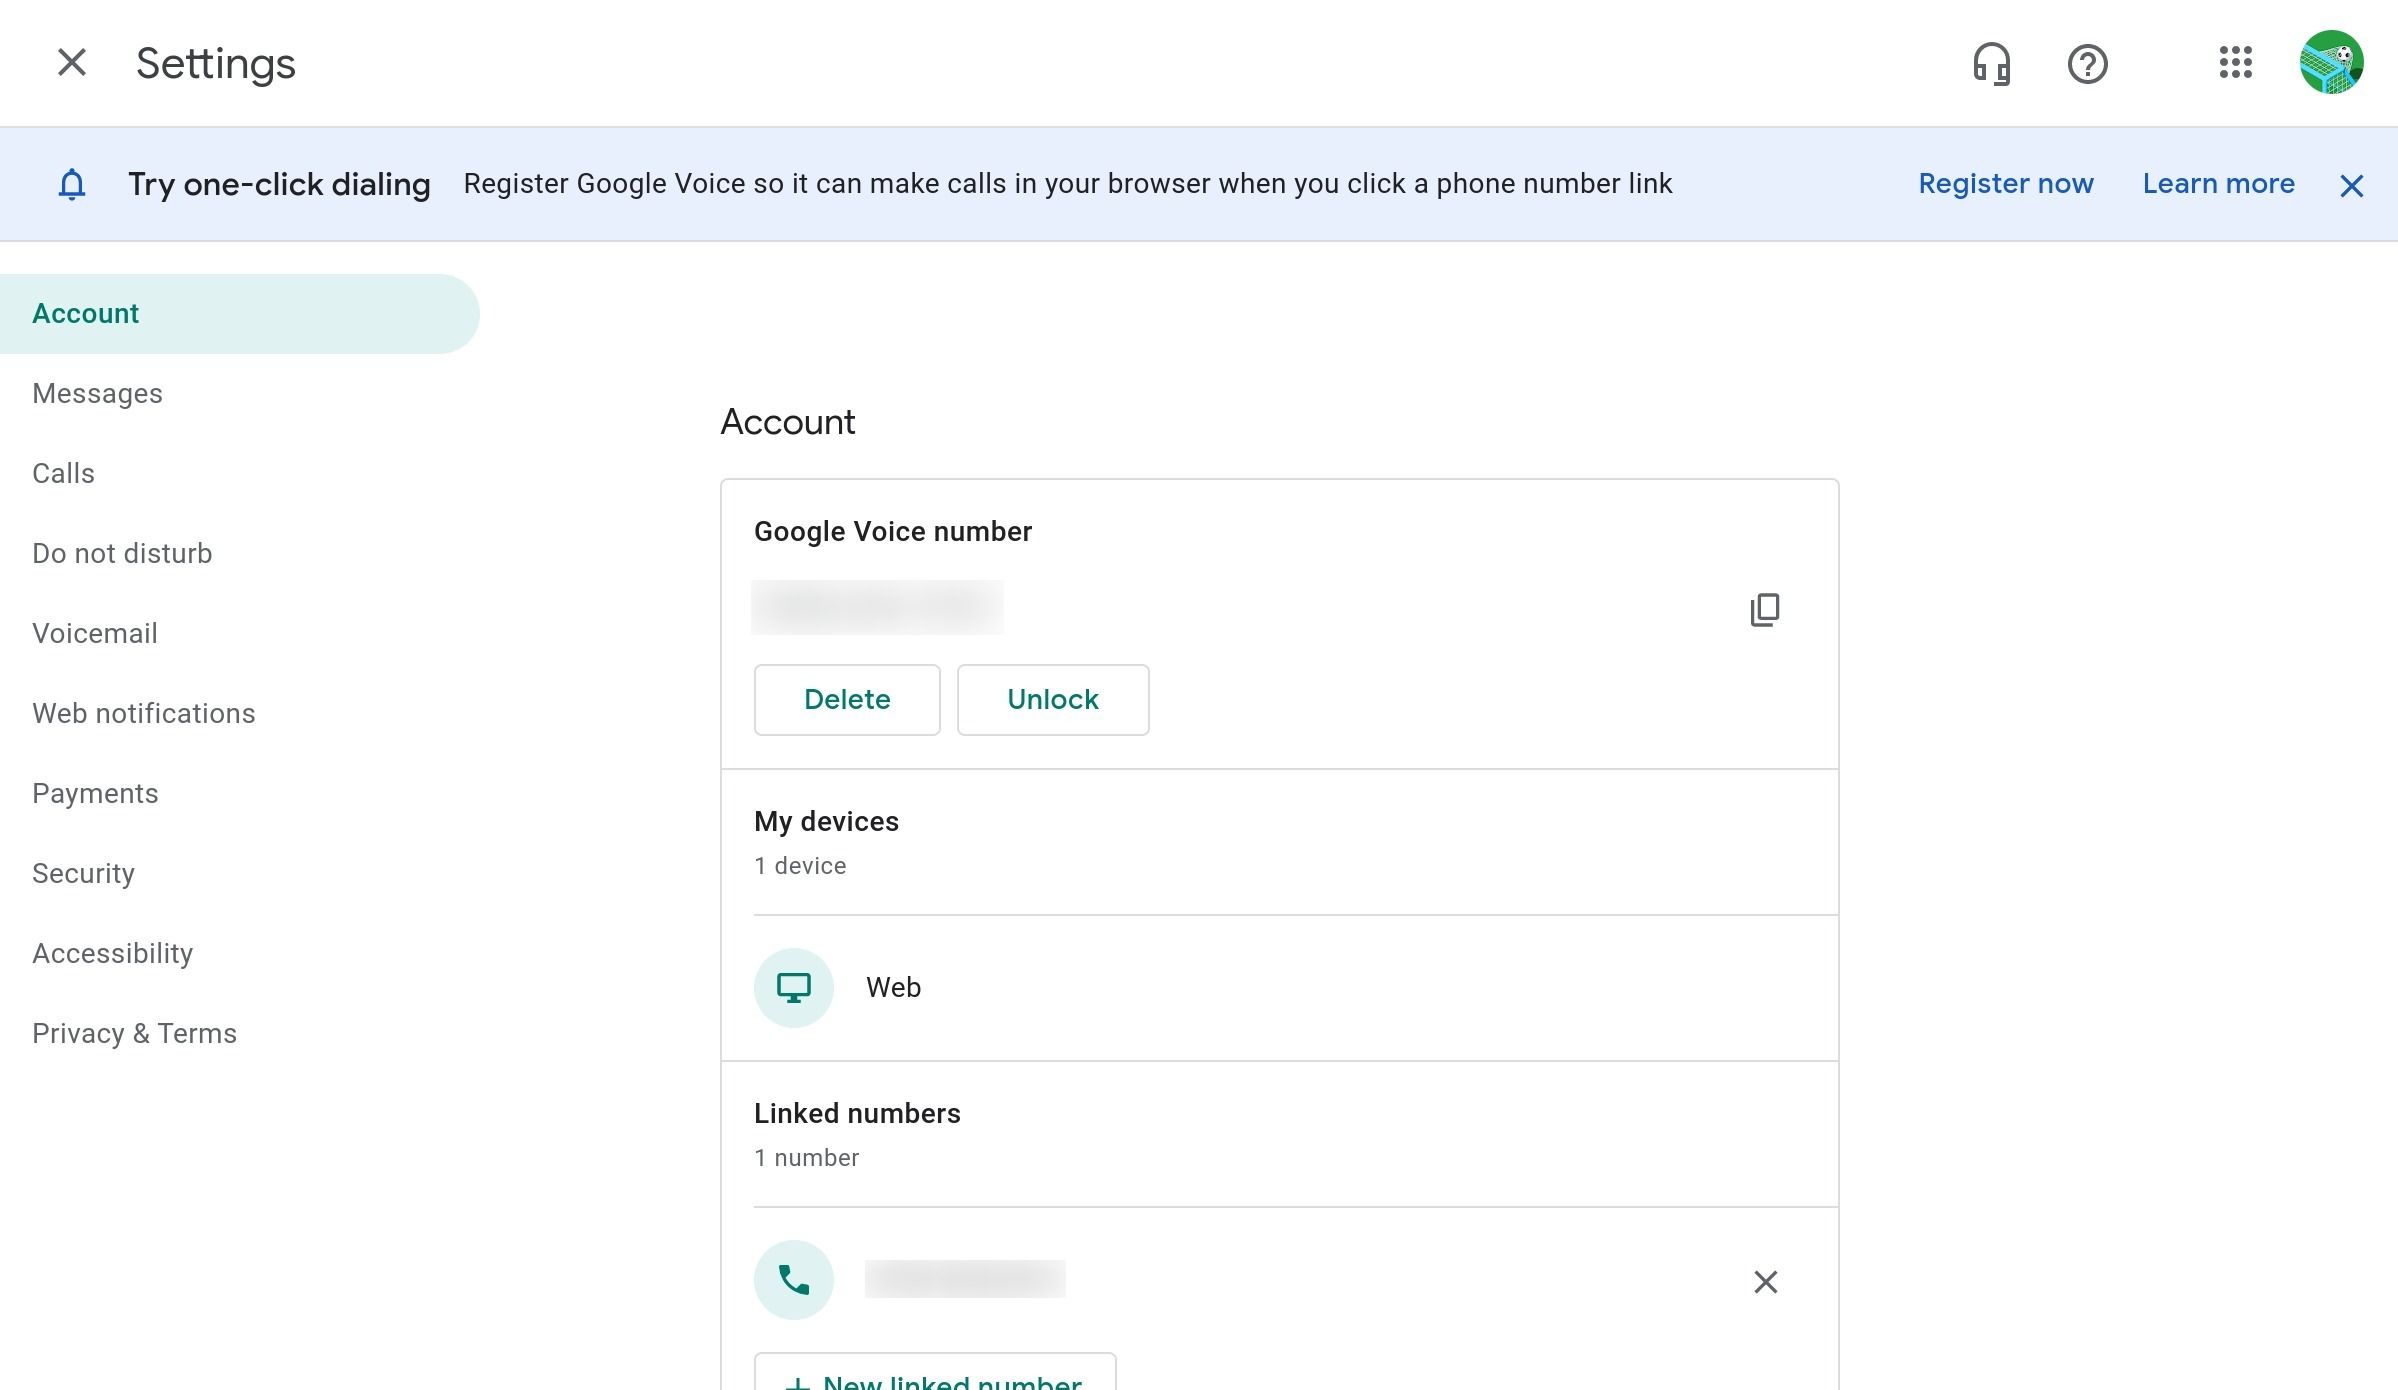 The Settings section of the Google Voice website